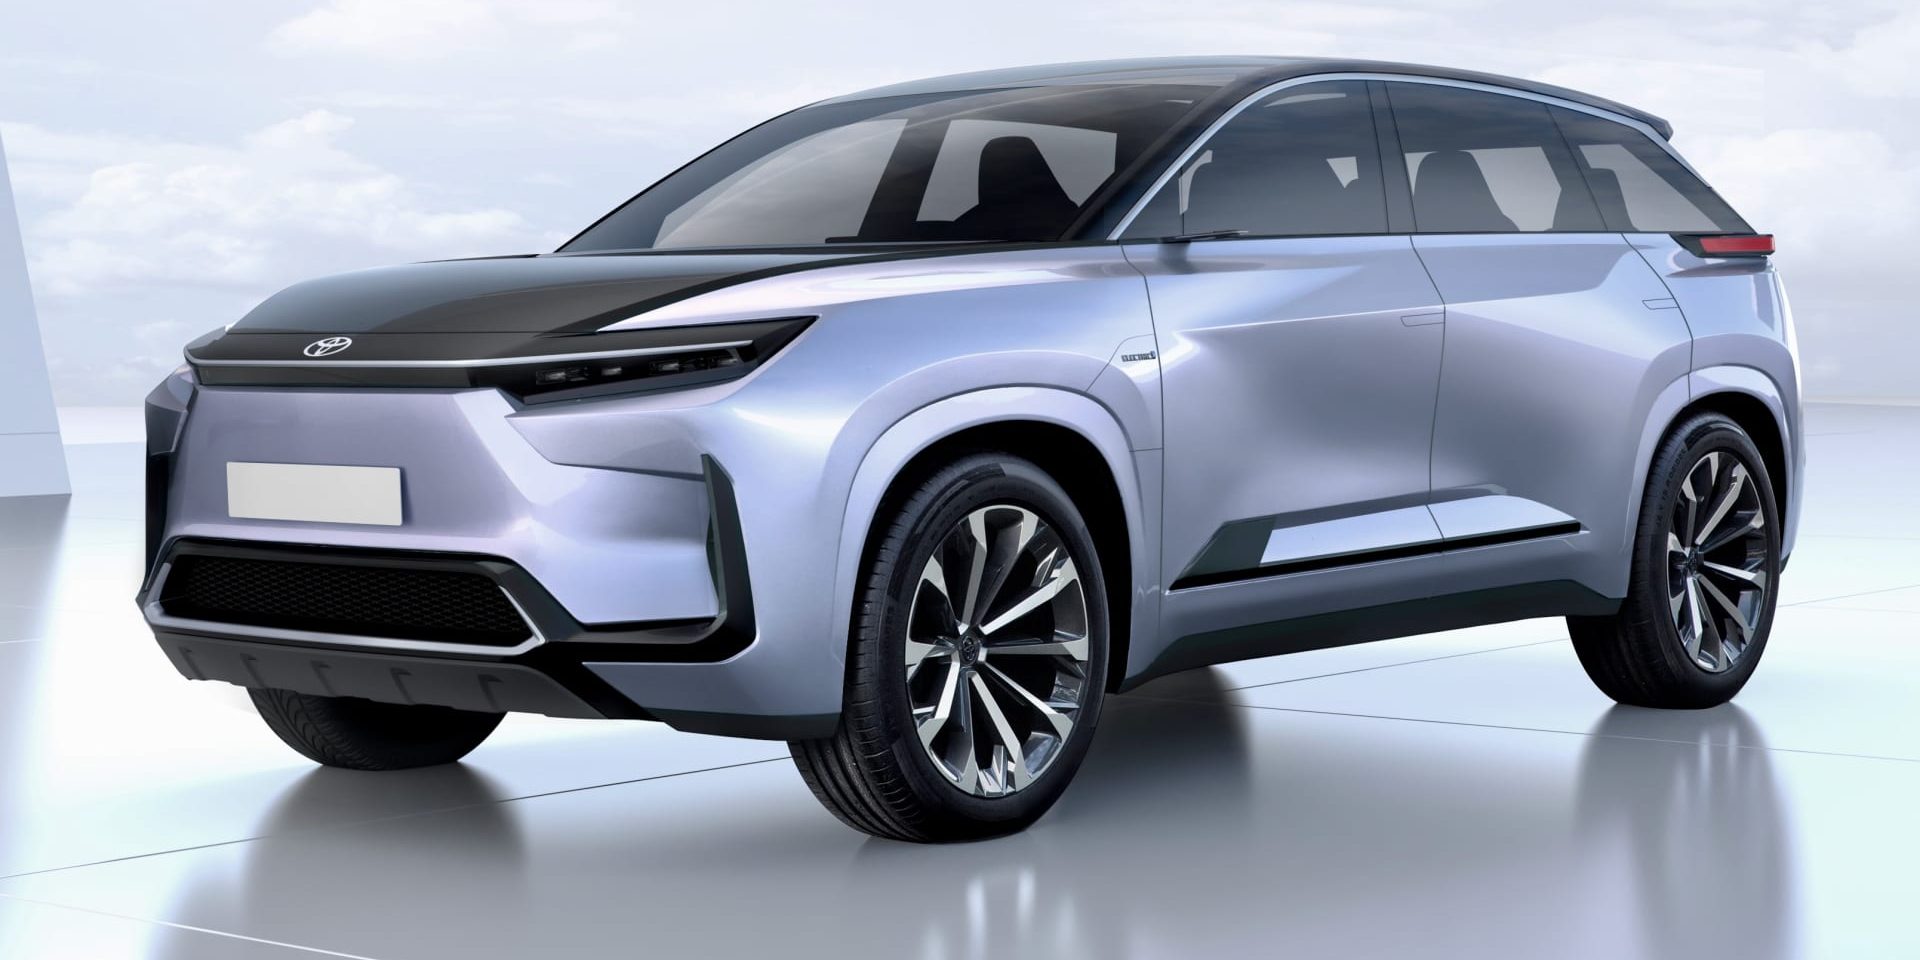 Toyota to build large electric SUV in US from 2025